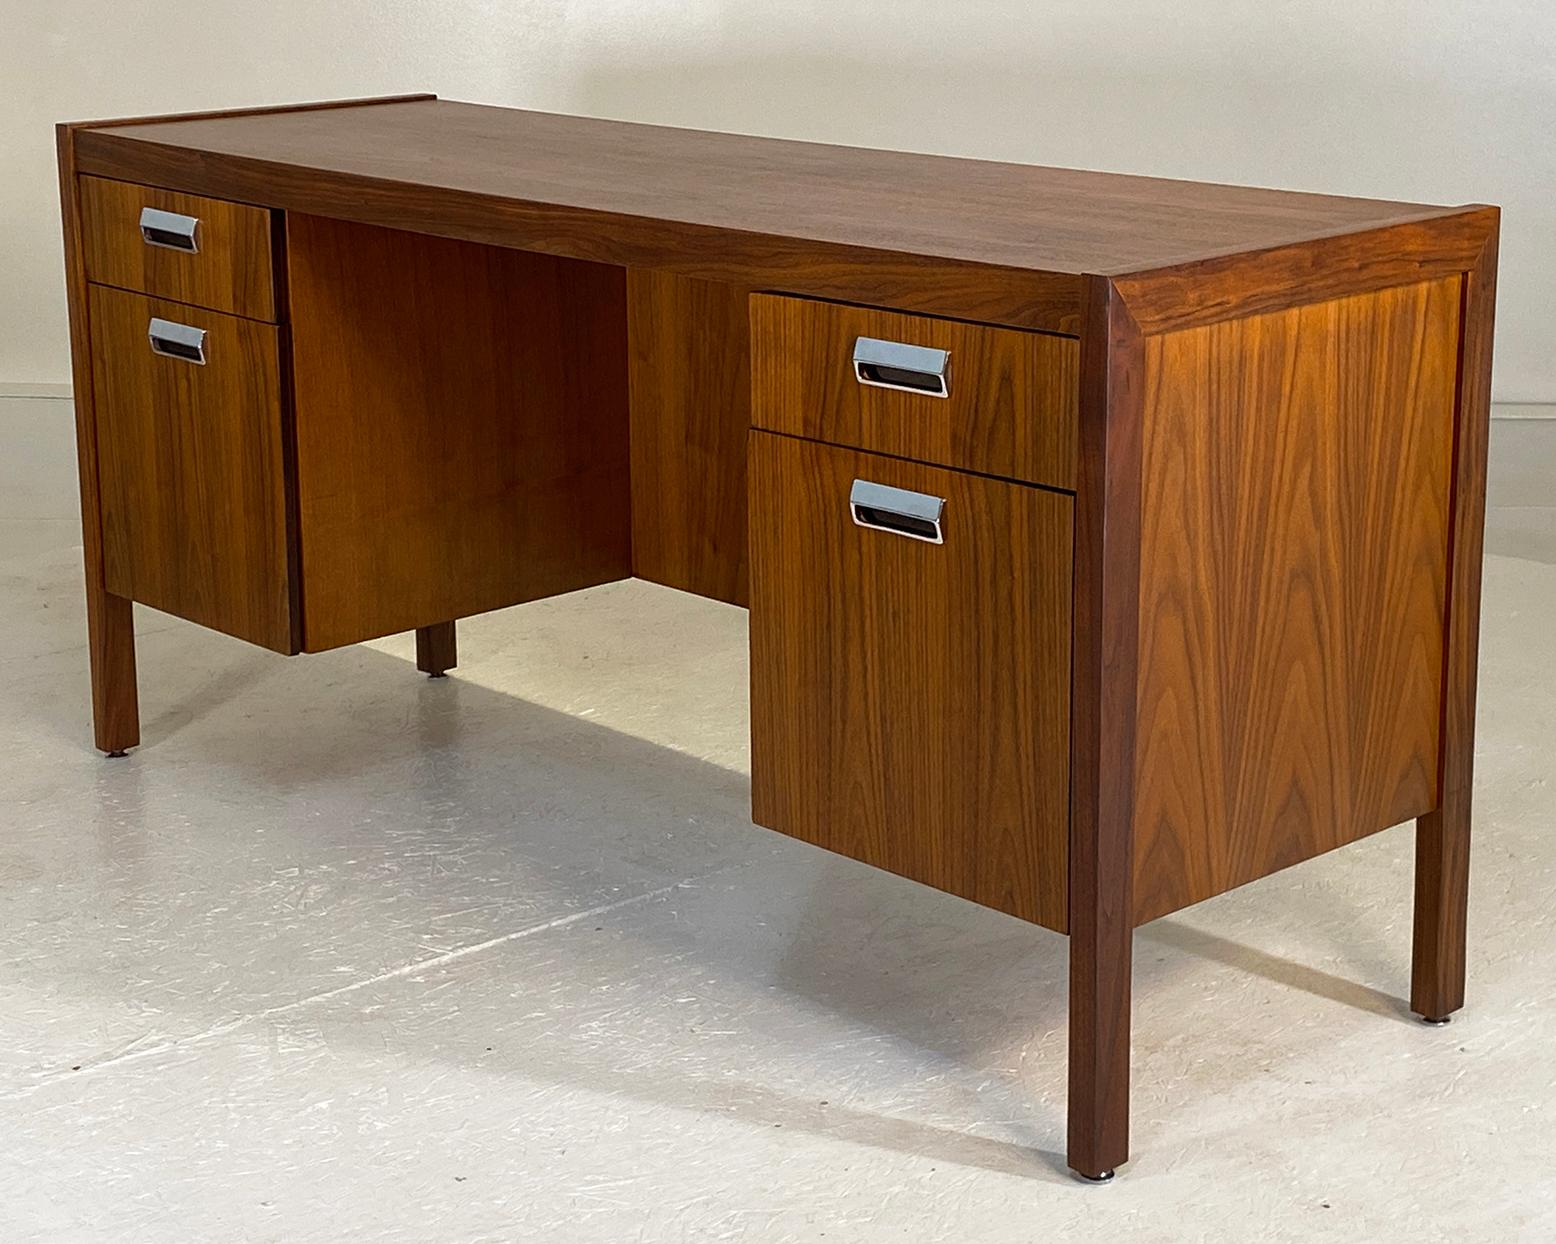 A sophisticated and practical desk in American Black Walnut. Measures 60.25